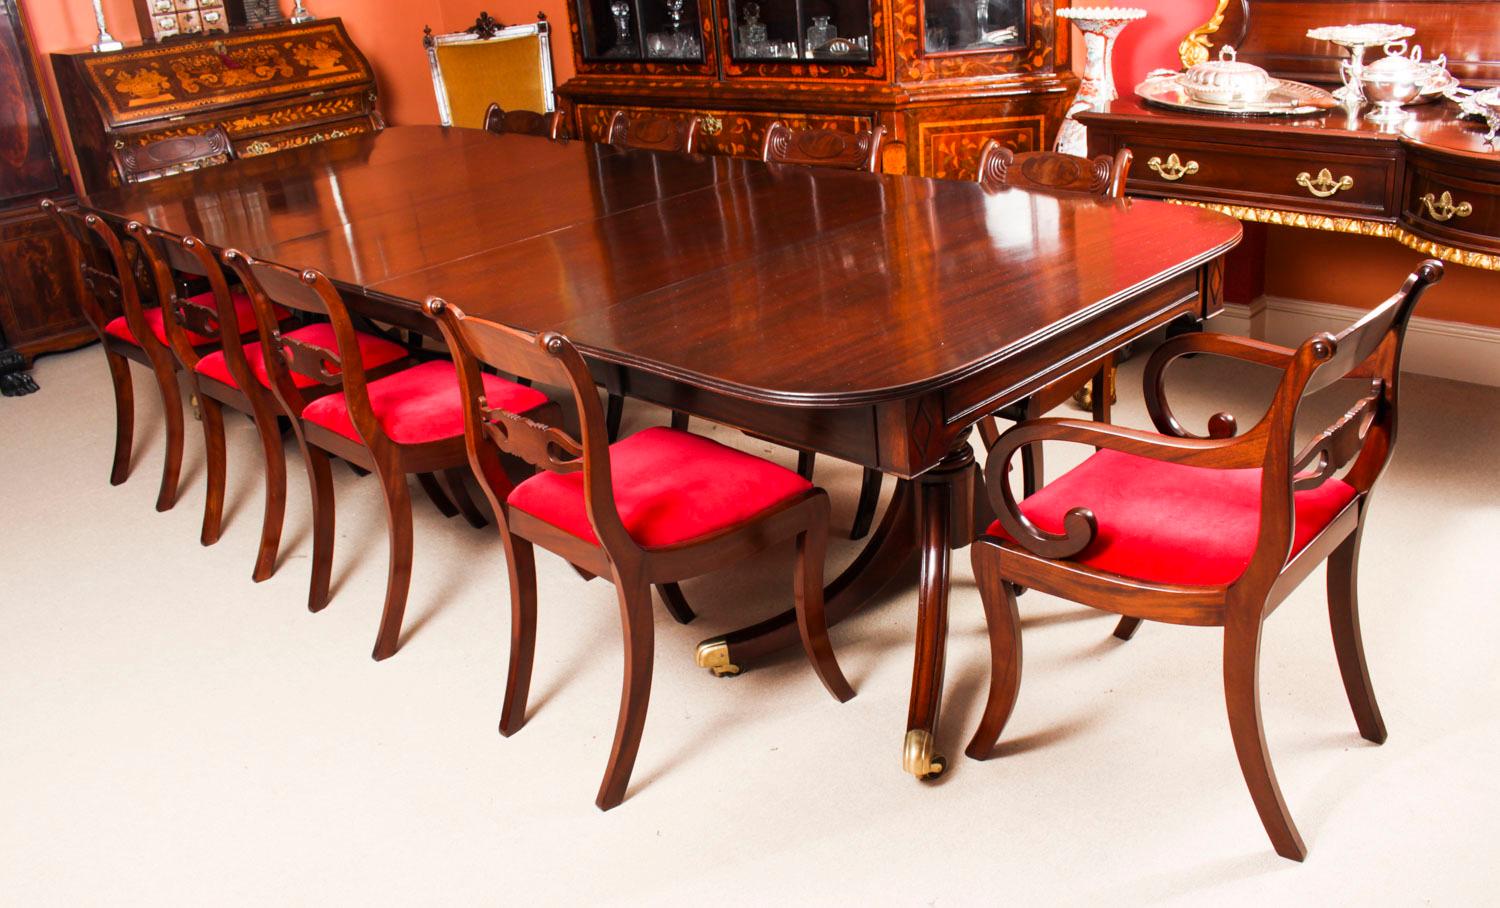 This is an elegant antique 11ft Regency Period dining table that can comfortably seat twelve people, circa 1820 in date.

The table is of rectangular form with rounded corners and reeded edge. It is raised on twin 